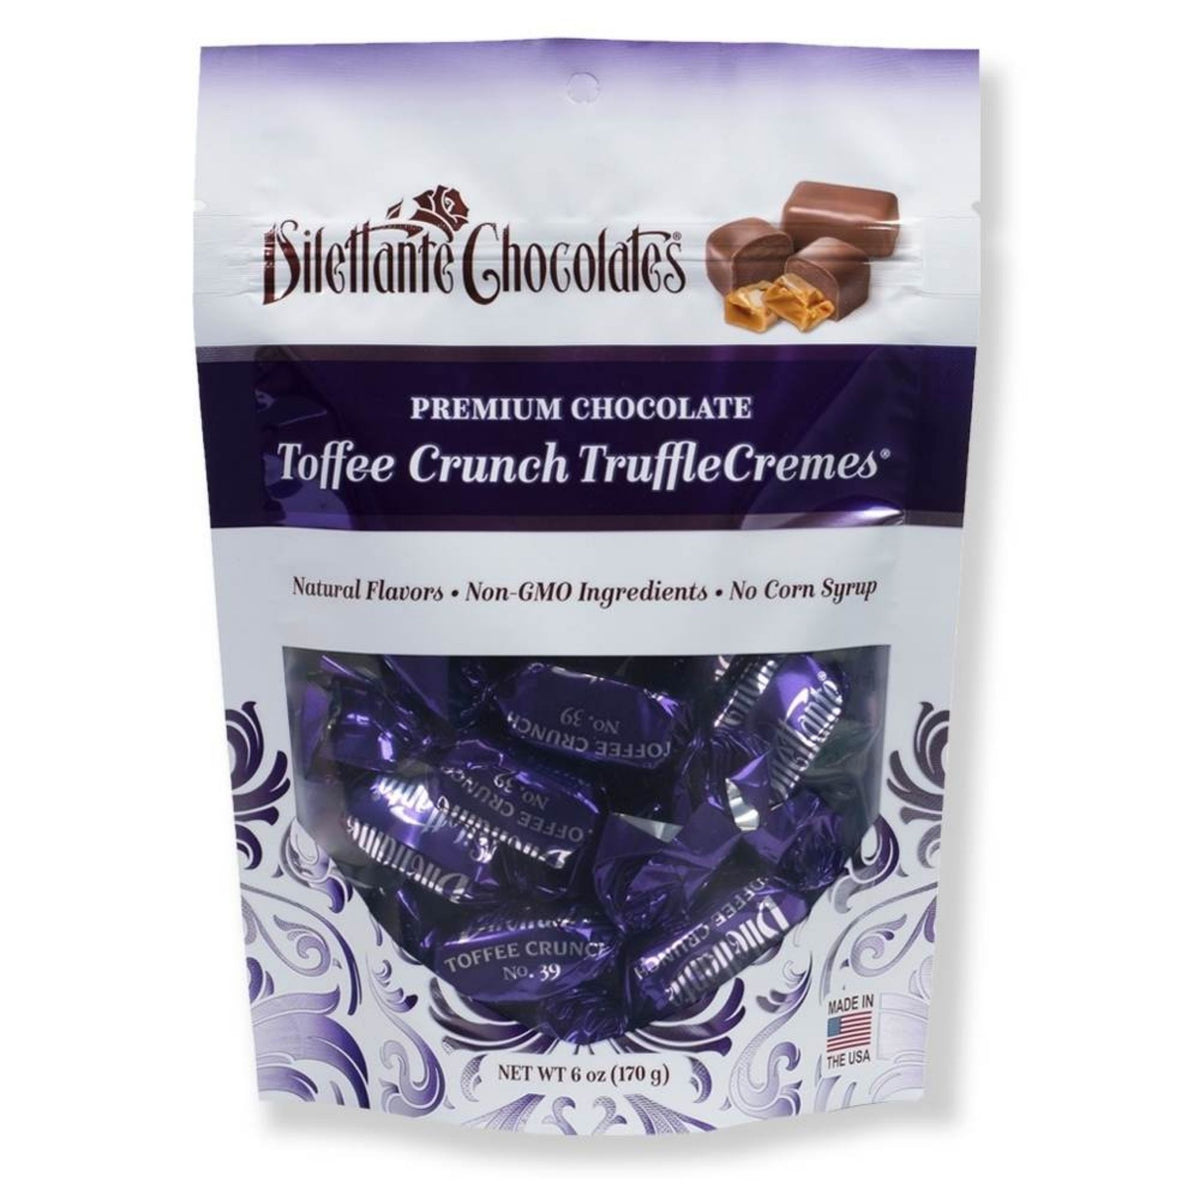 Dilettante Chocolates Premium Chocolate Toffee Crunch TruffleCremes Made with Natural Flavors Non-GMO Ingredients and No Corn Syrup